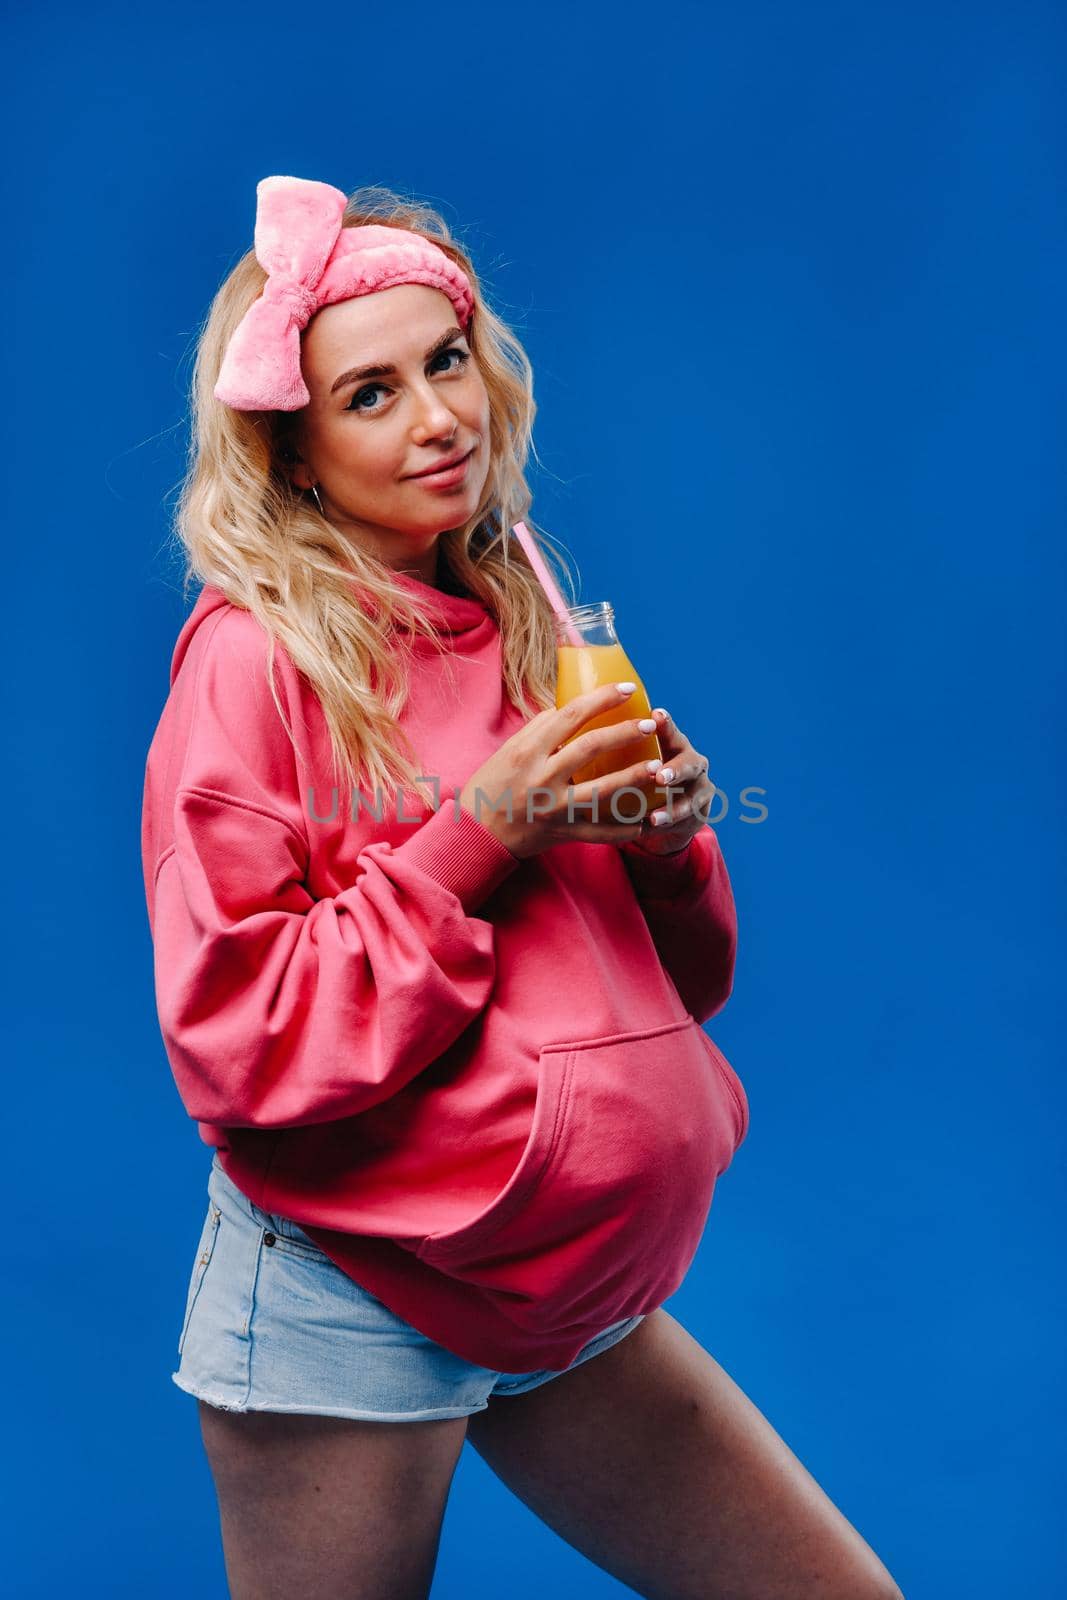 pregnant girl in pink clothes with a bottle of juice on a blue background.